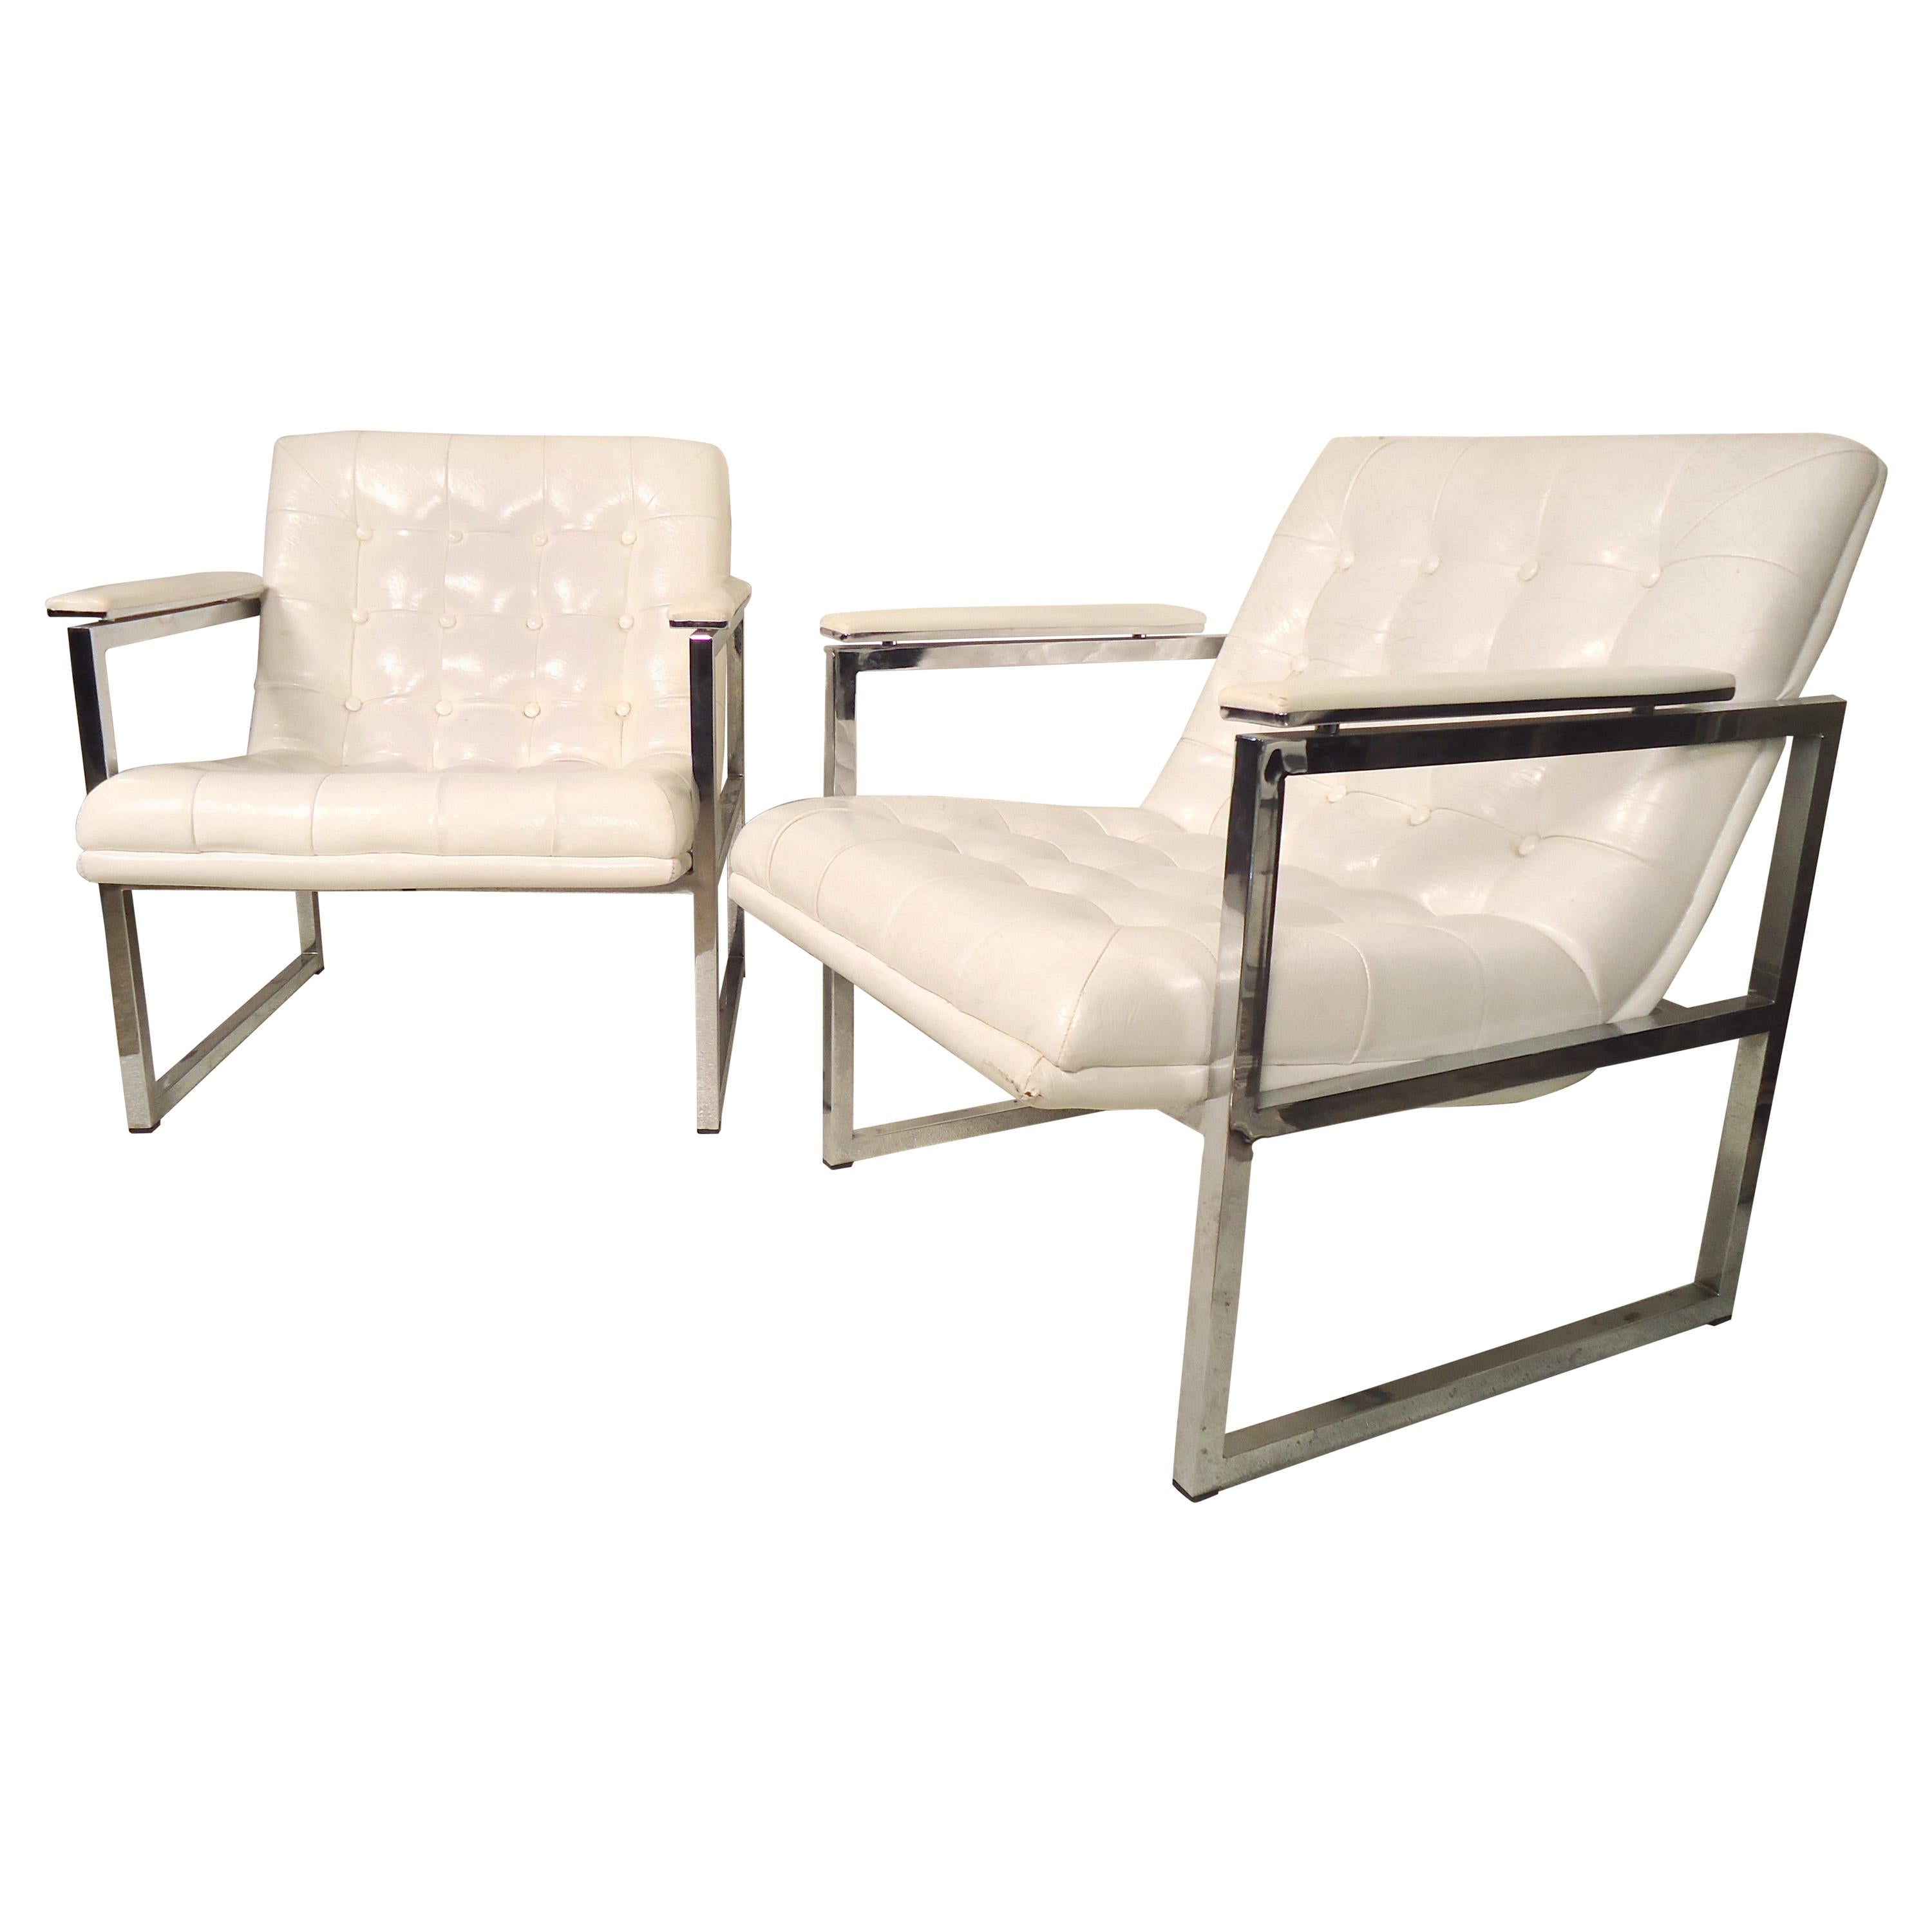 Chrome Frame Midcentury Chairs